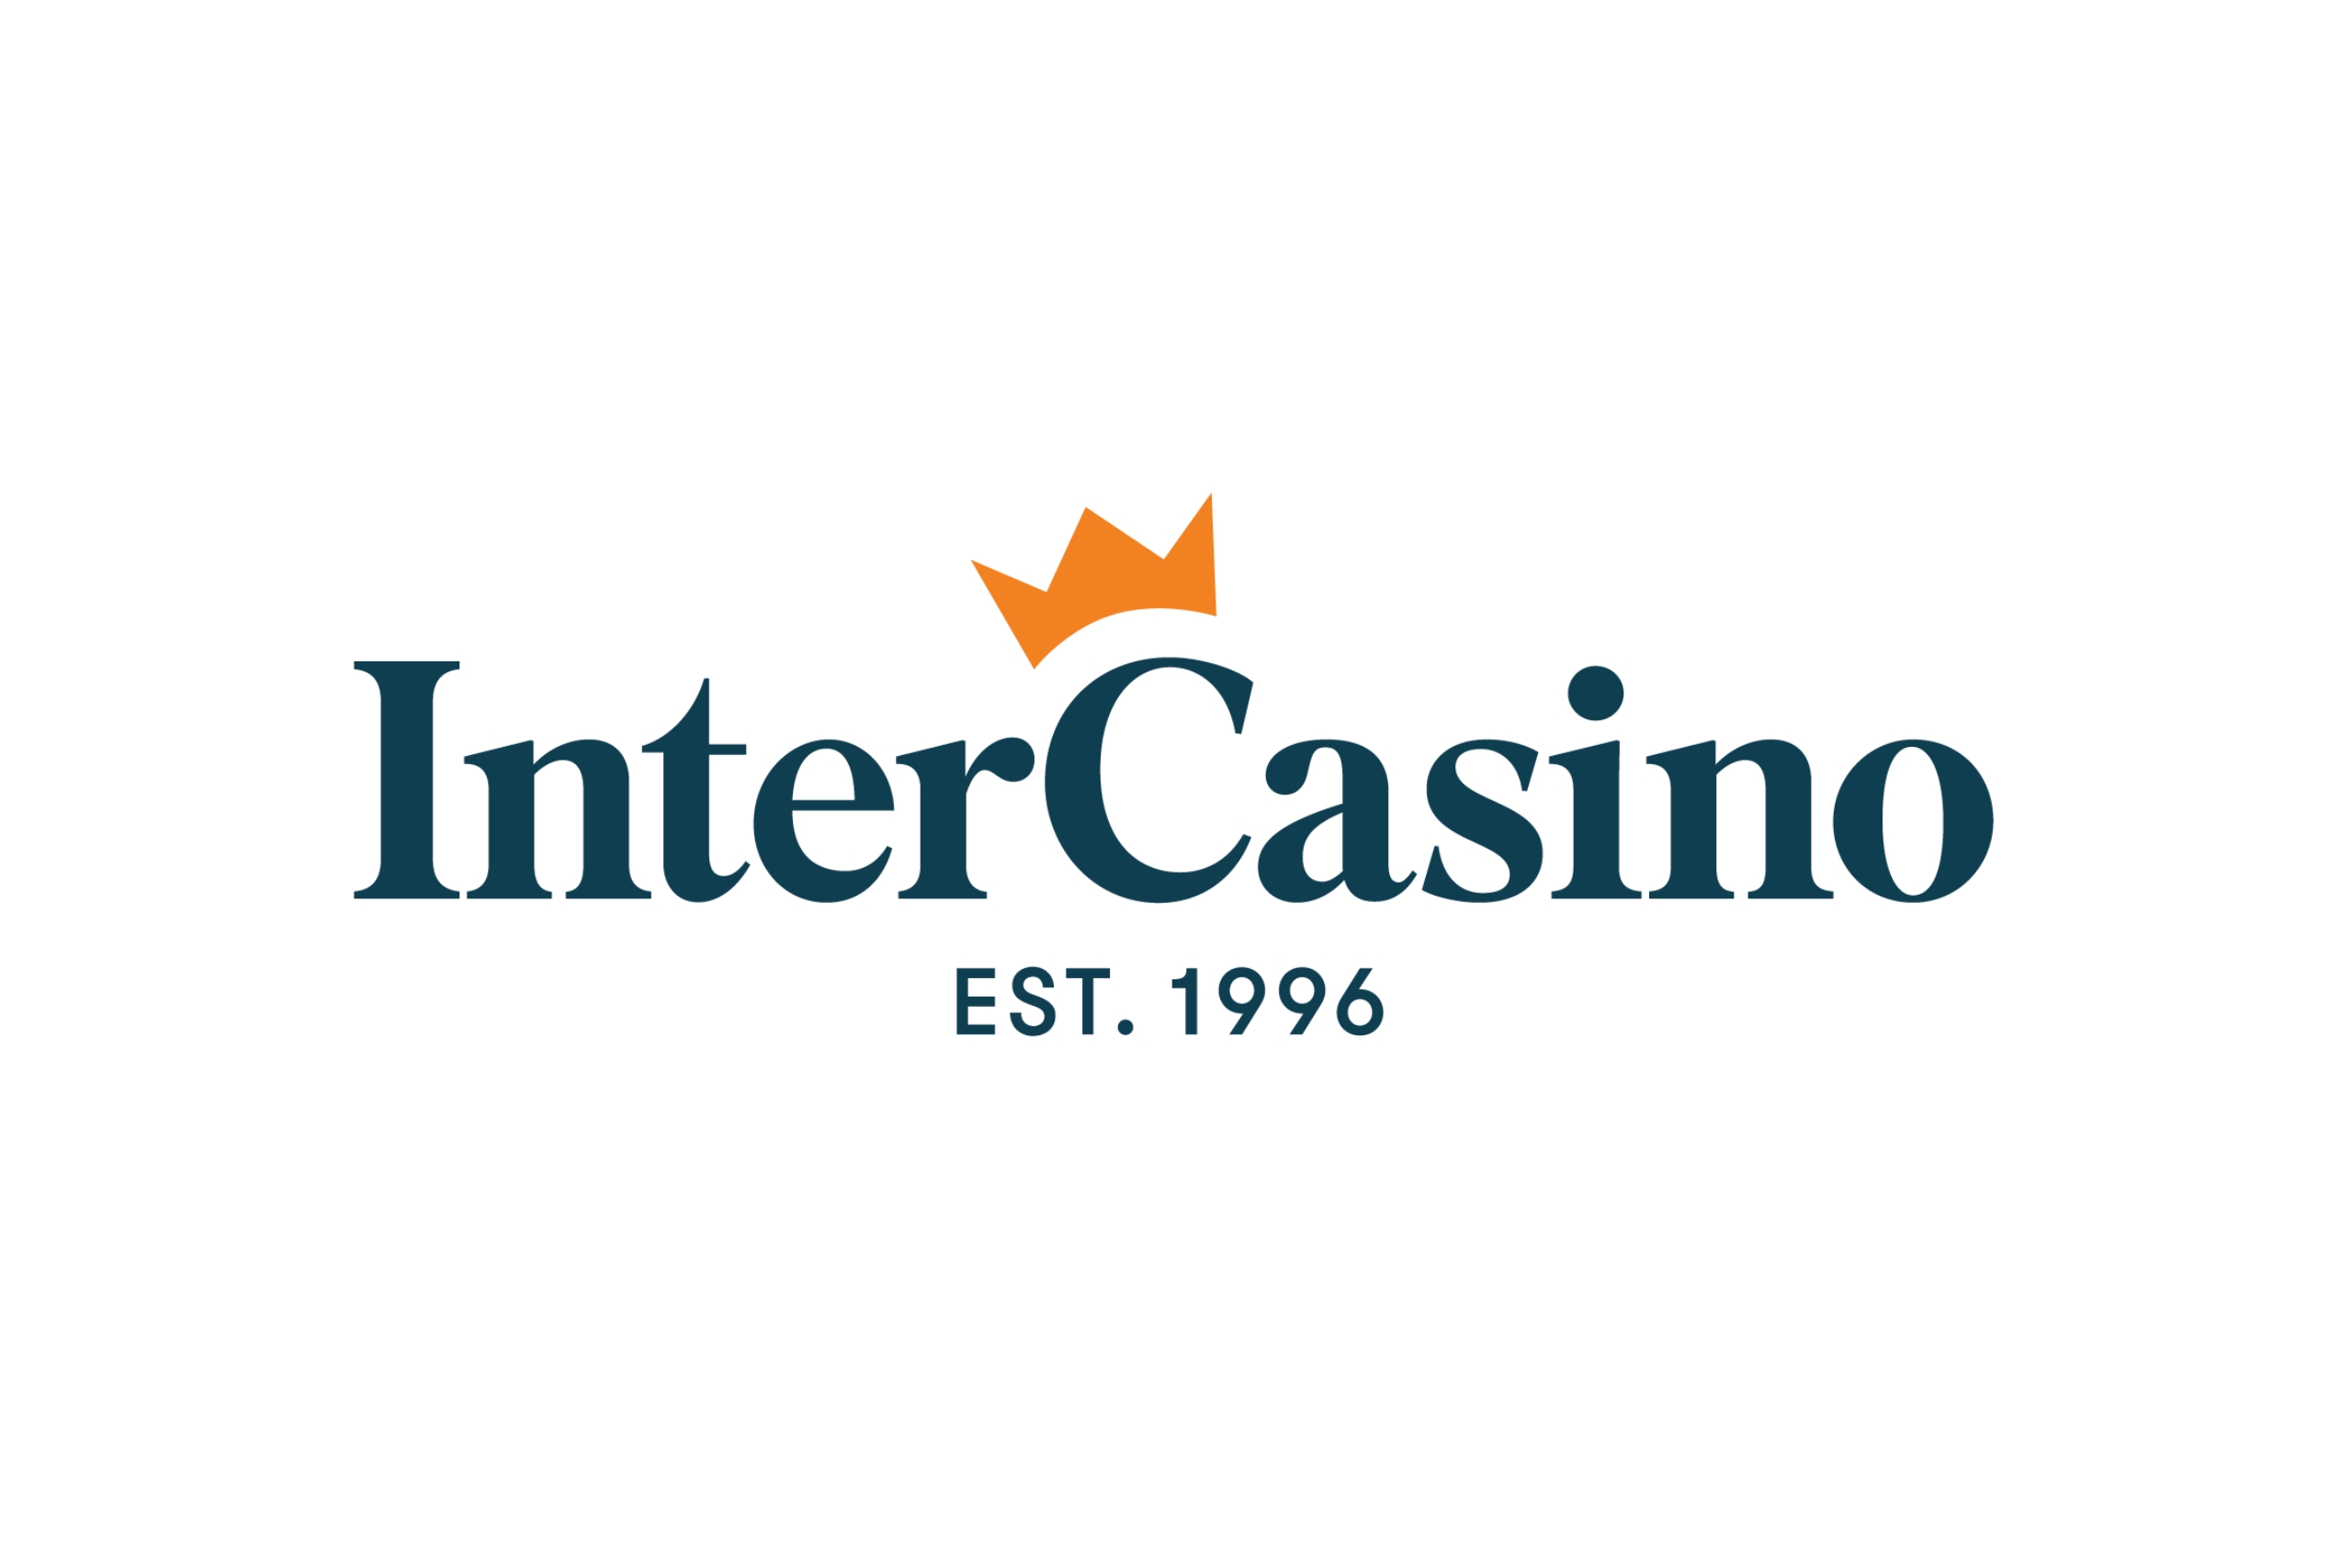 The Top Five Games to Play at InterCasino for Big Wins